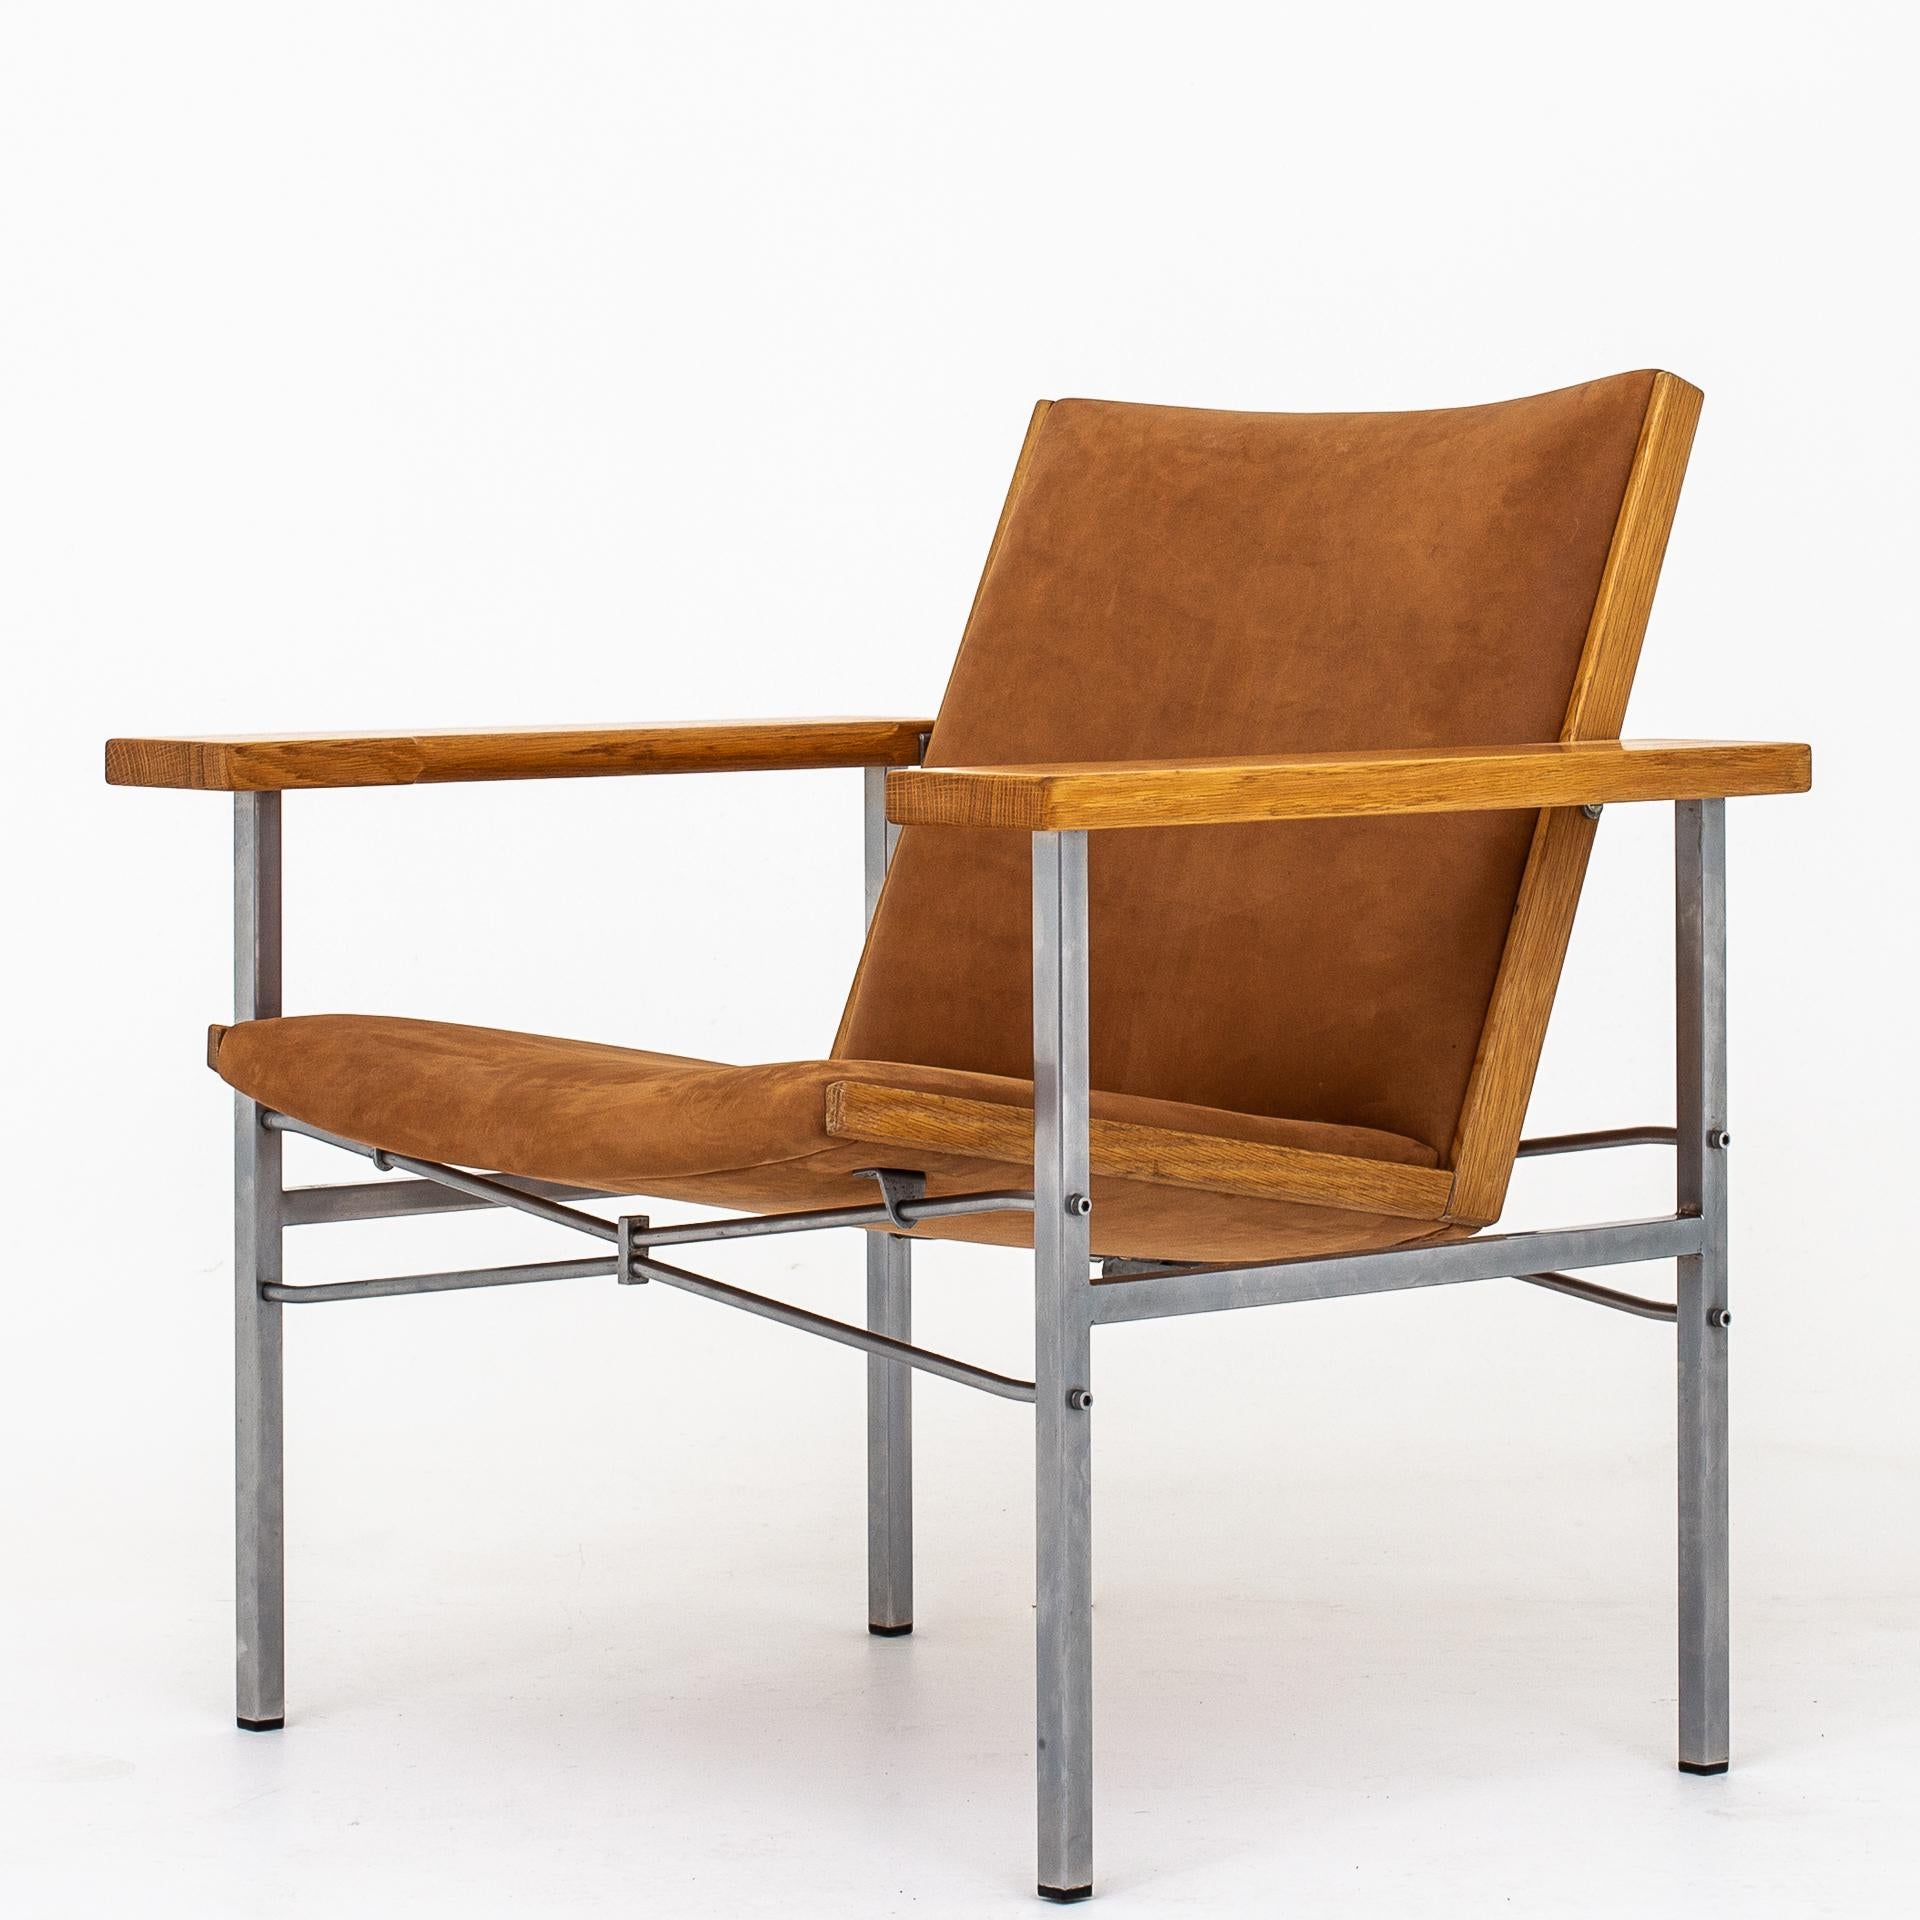 JH 703 - Easy chairs in oak and steel, reupholstered with Dunes cognac leather. Maker Johannes Hansen.